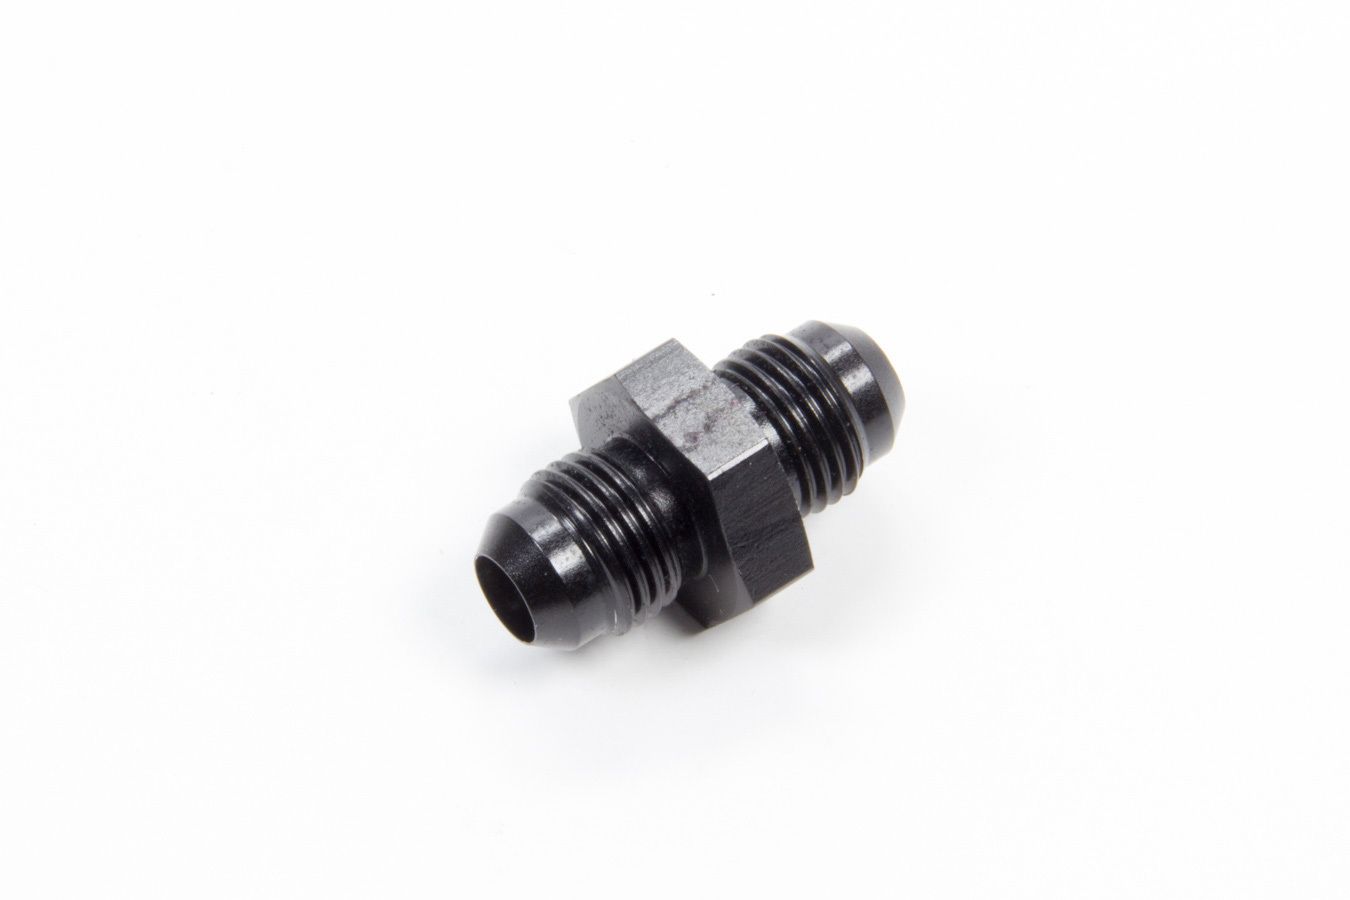 Aeroquip FCM5052 Fitting, Adapter, Straight, 6 AN Male to 6 AN Male, Aluminum, Black Anodized, Each